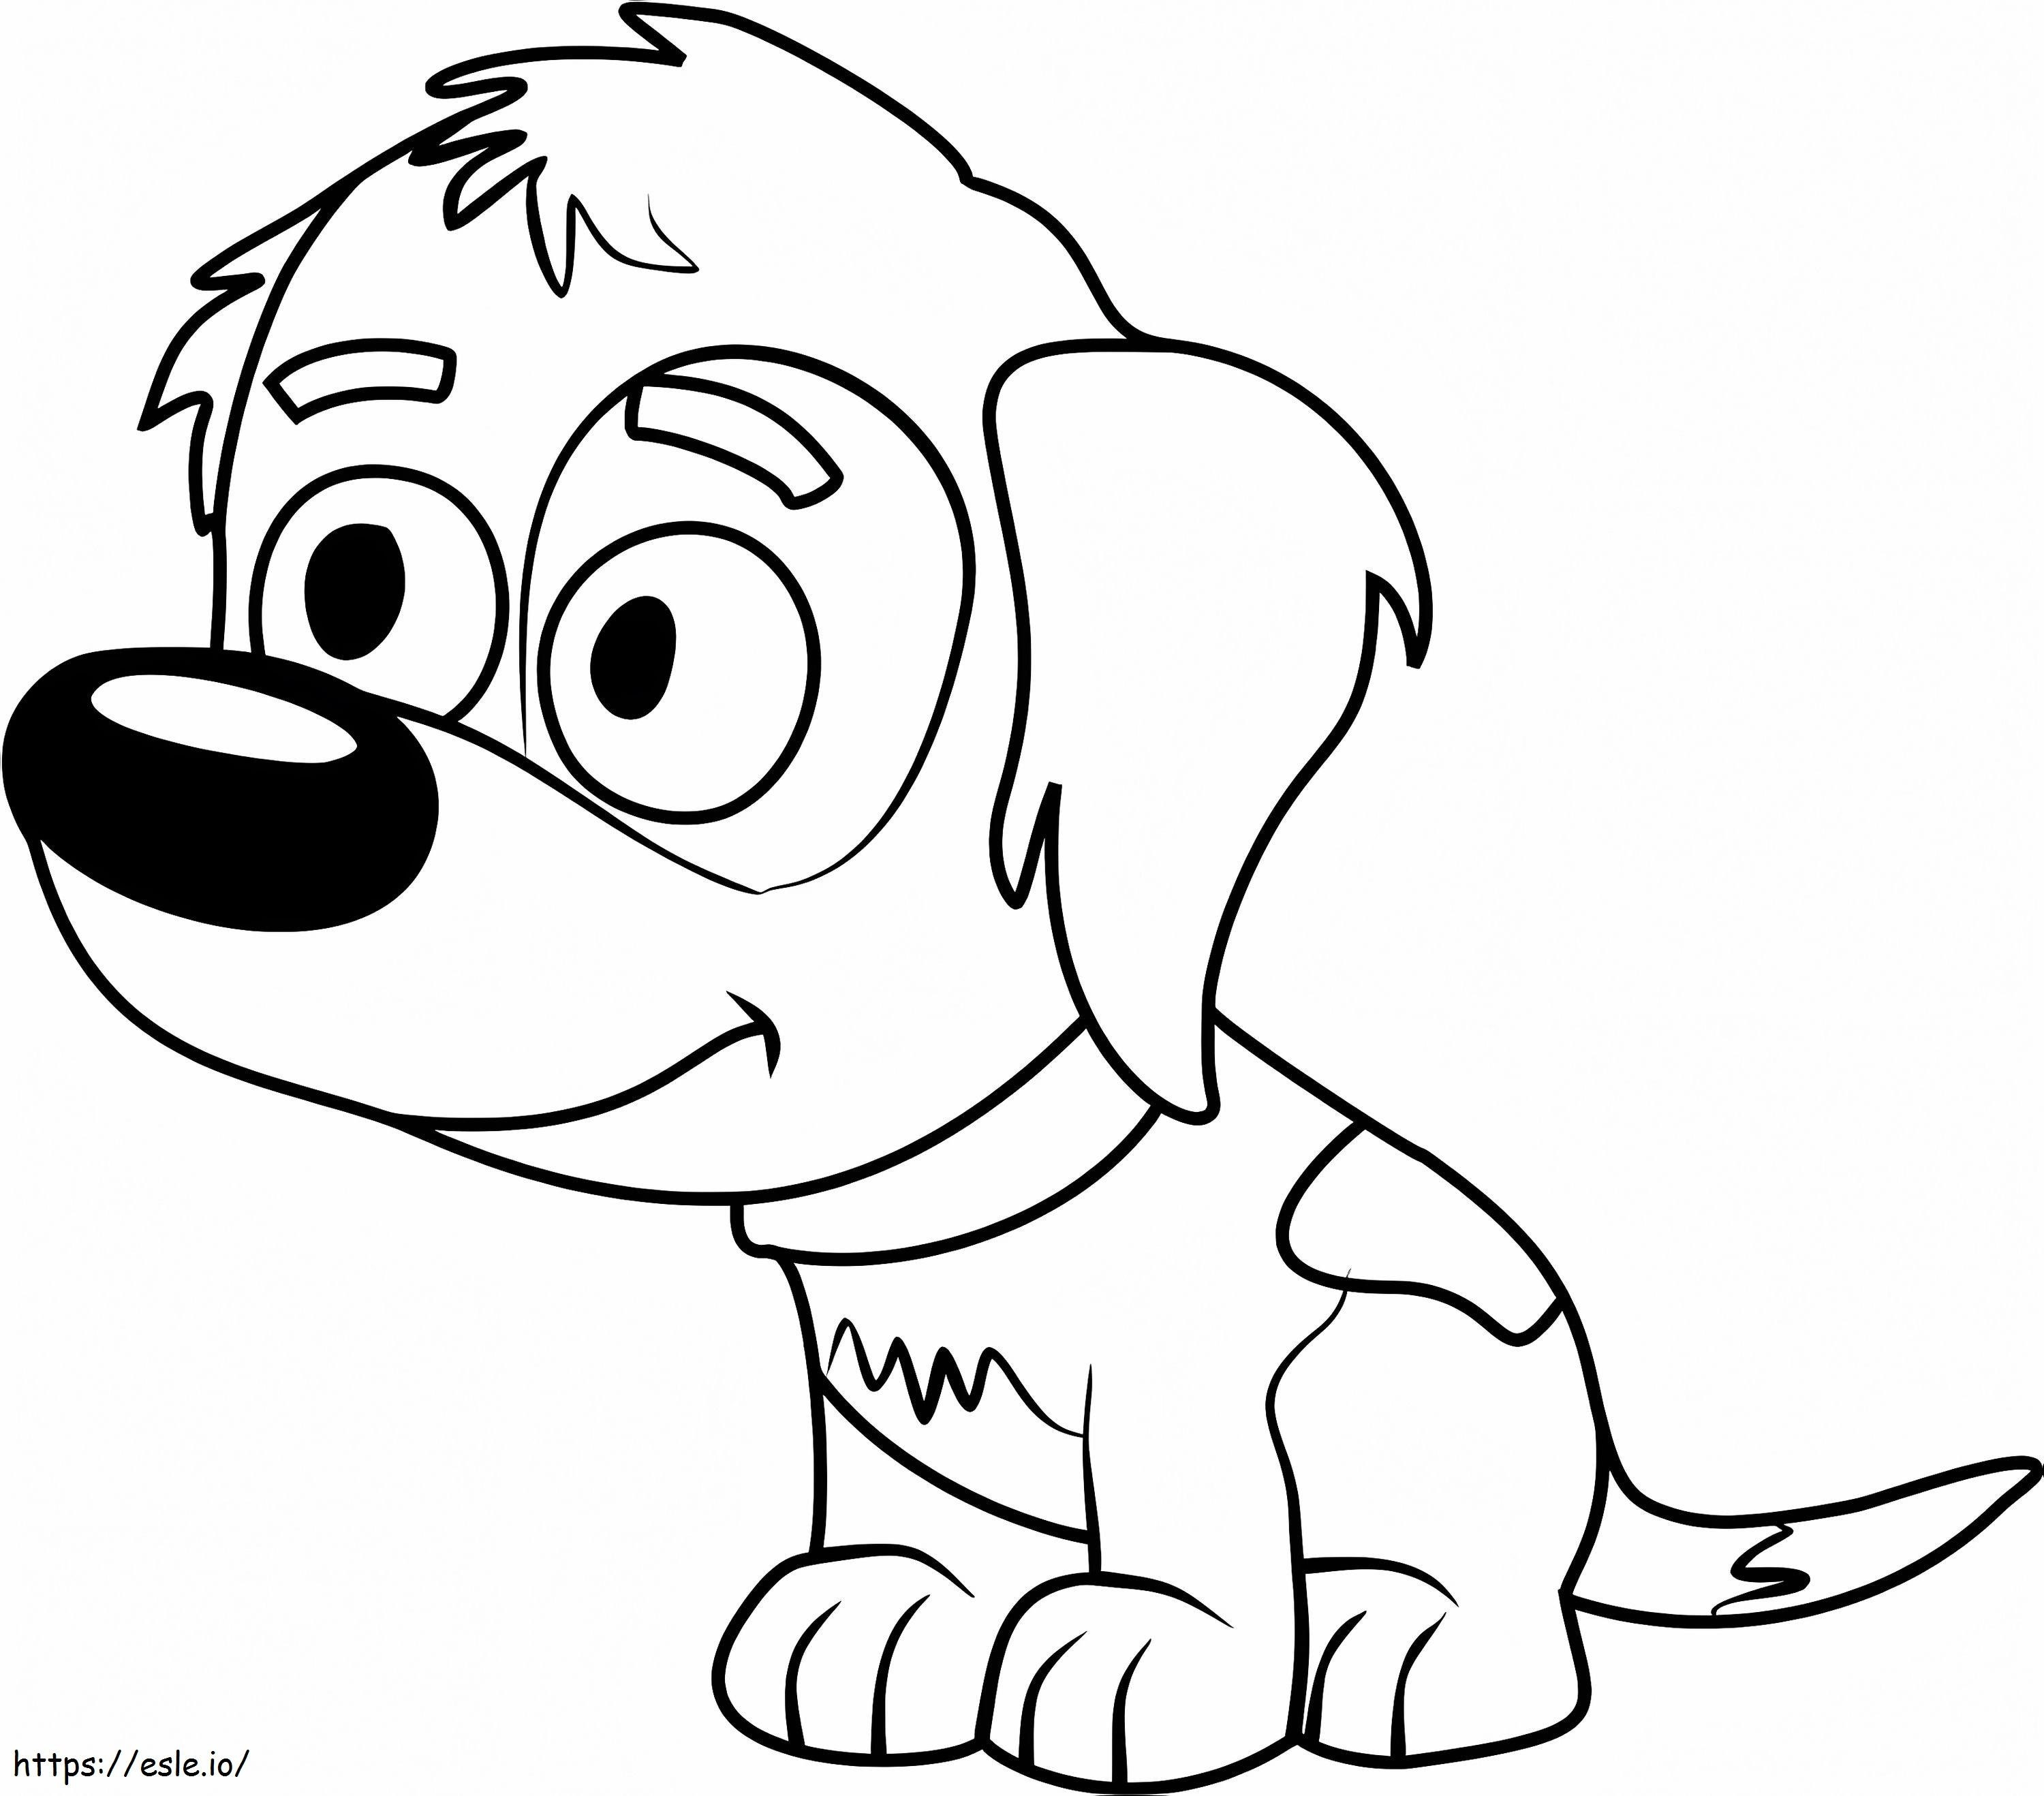 Pupster From Pound Puppies coloring page